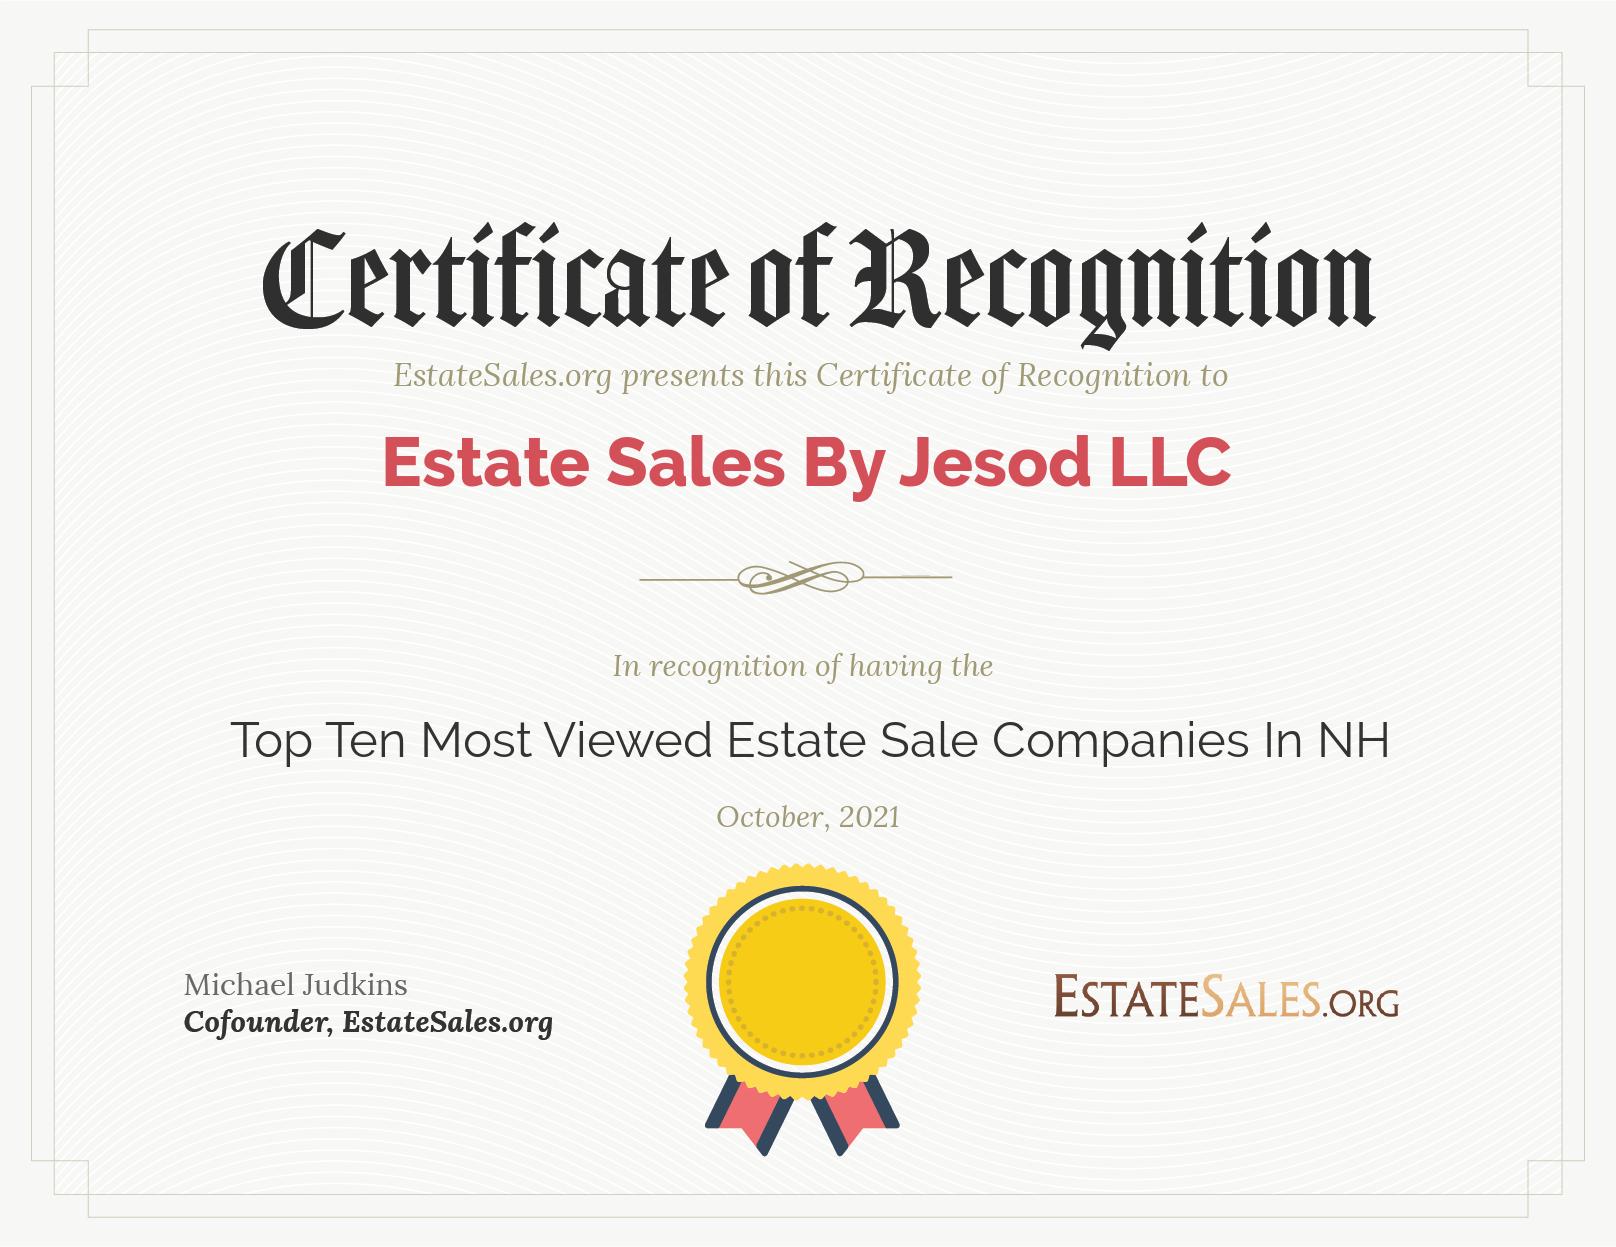 We’re One Of The Top 10 Most Viewed Estate Sale Companies In NH!